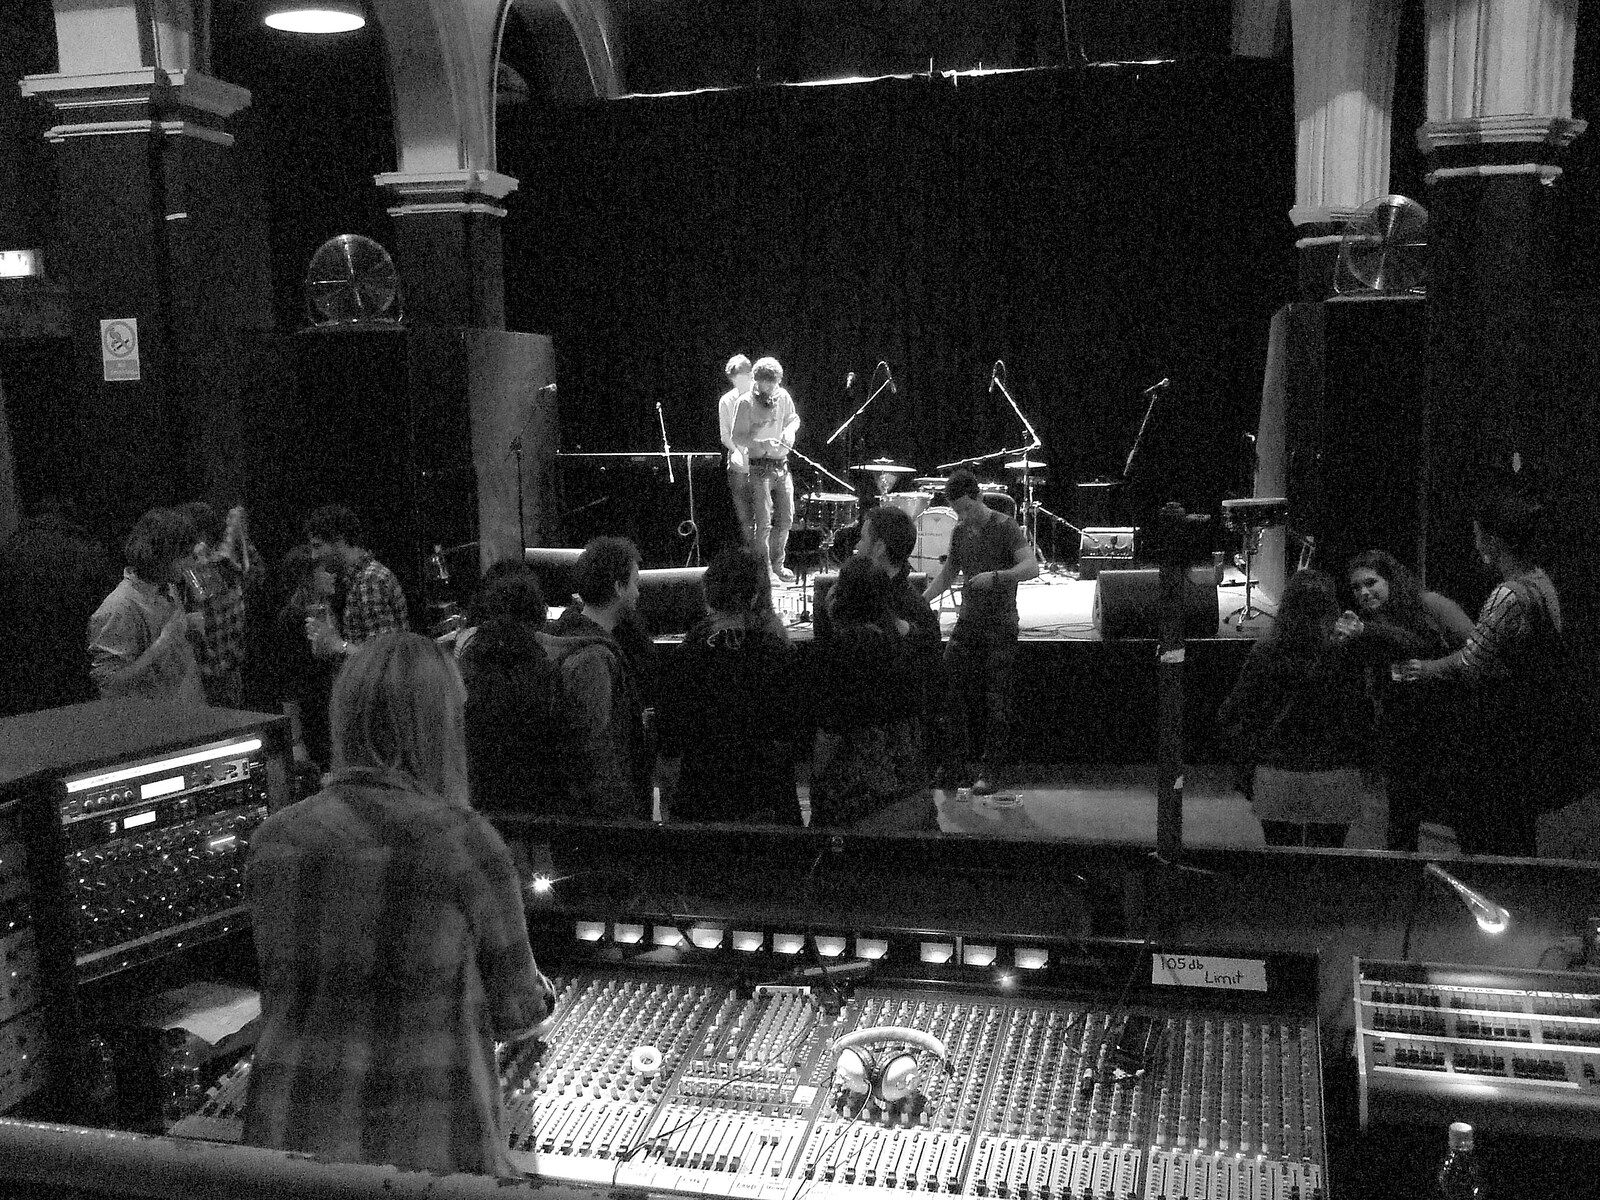 New Year's Day, and The Miserable Rich at the Arts Centre, Southwold and Norwich - 1st January 2011: The view from behind the sound desk